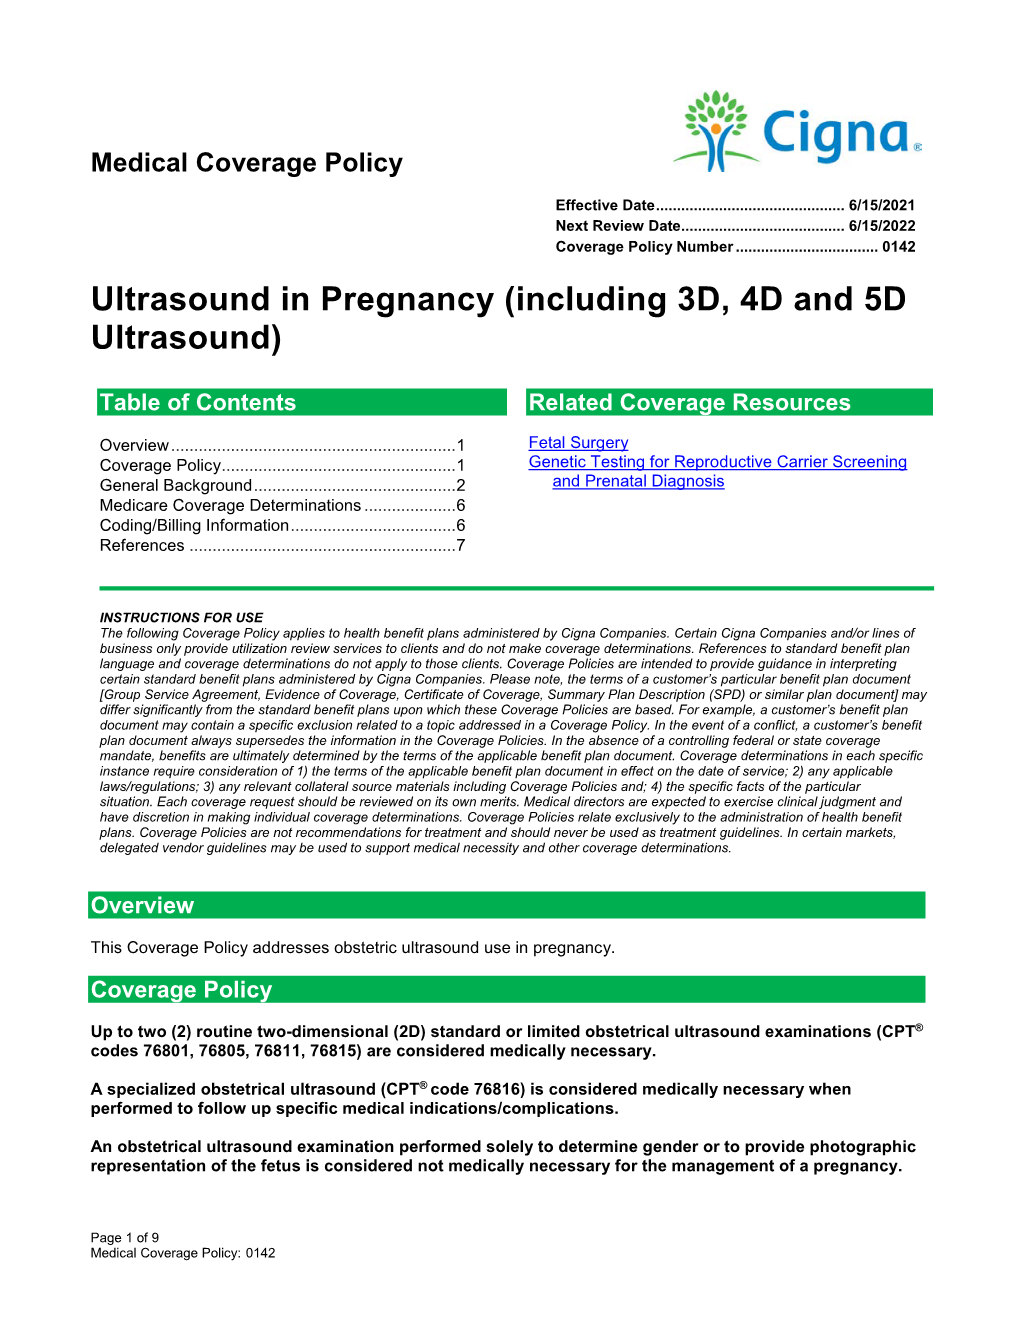 Ultrasound in Pregnancy (Including 3D, 4D and 5D Ultrasound)